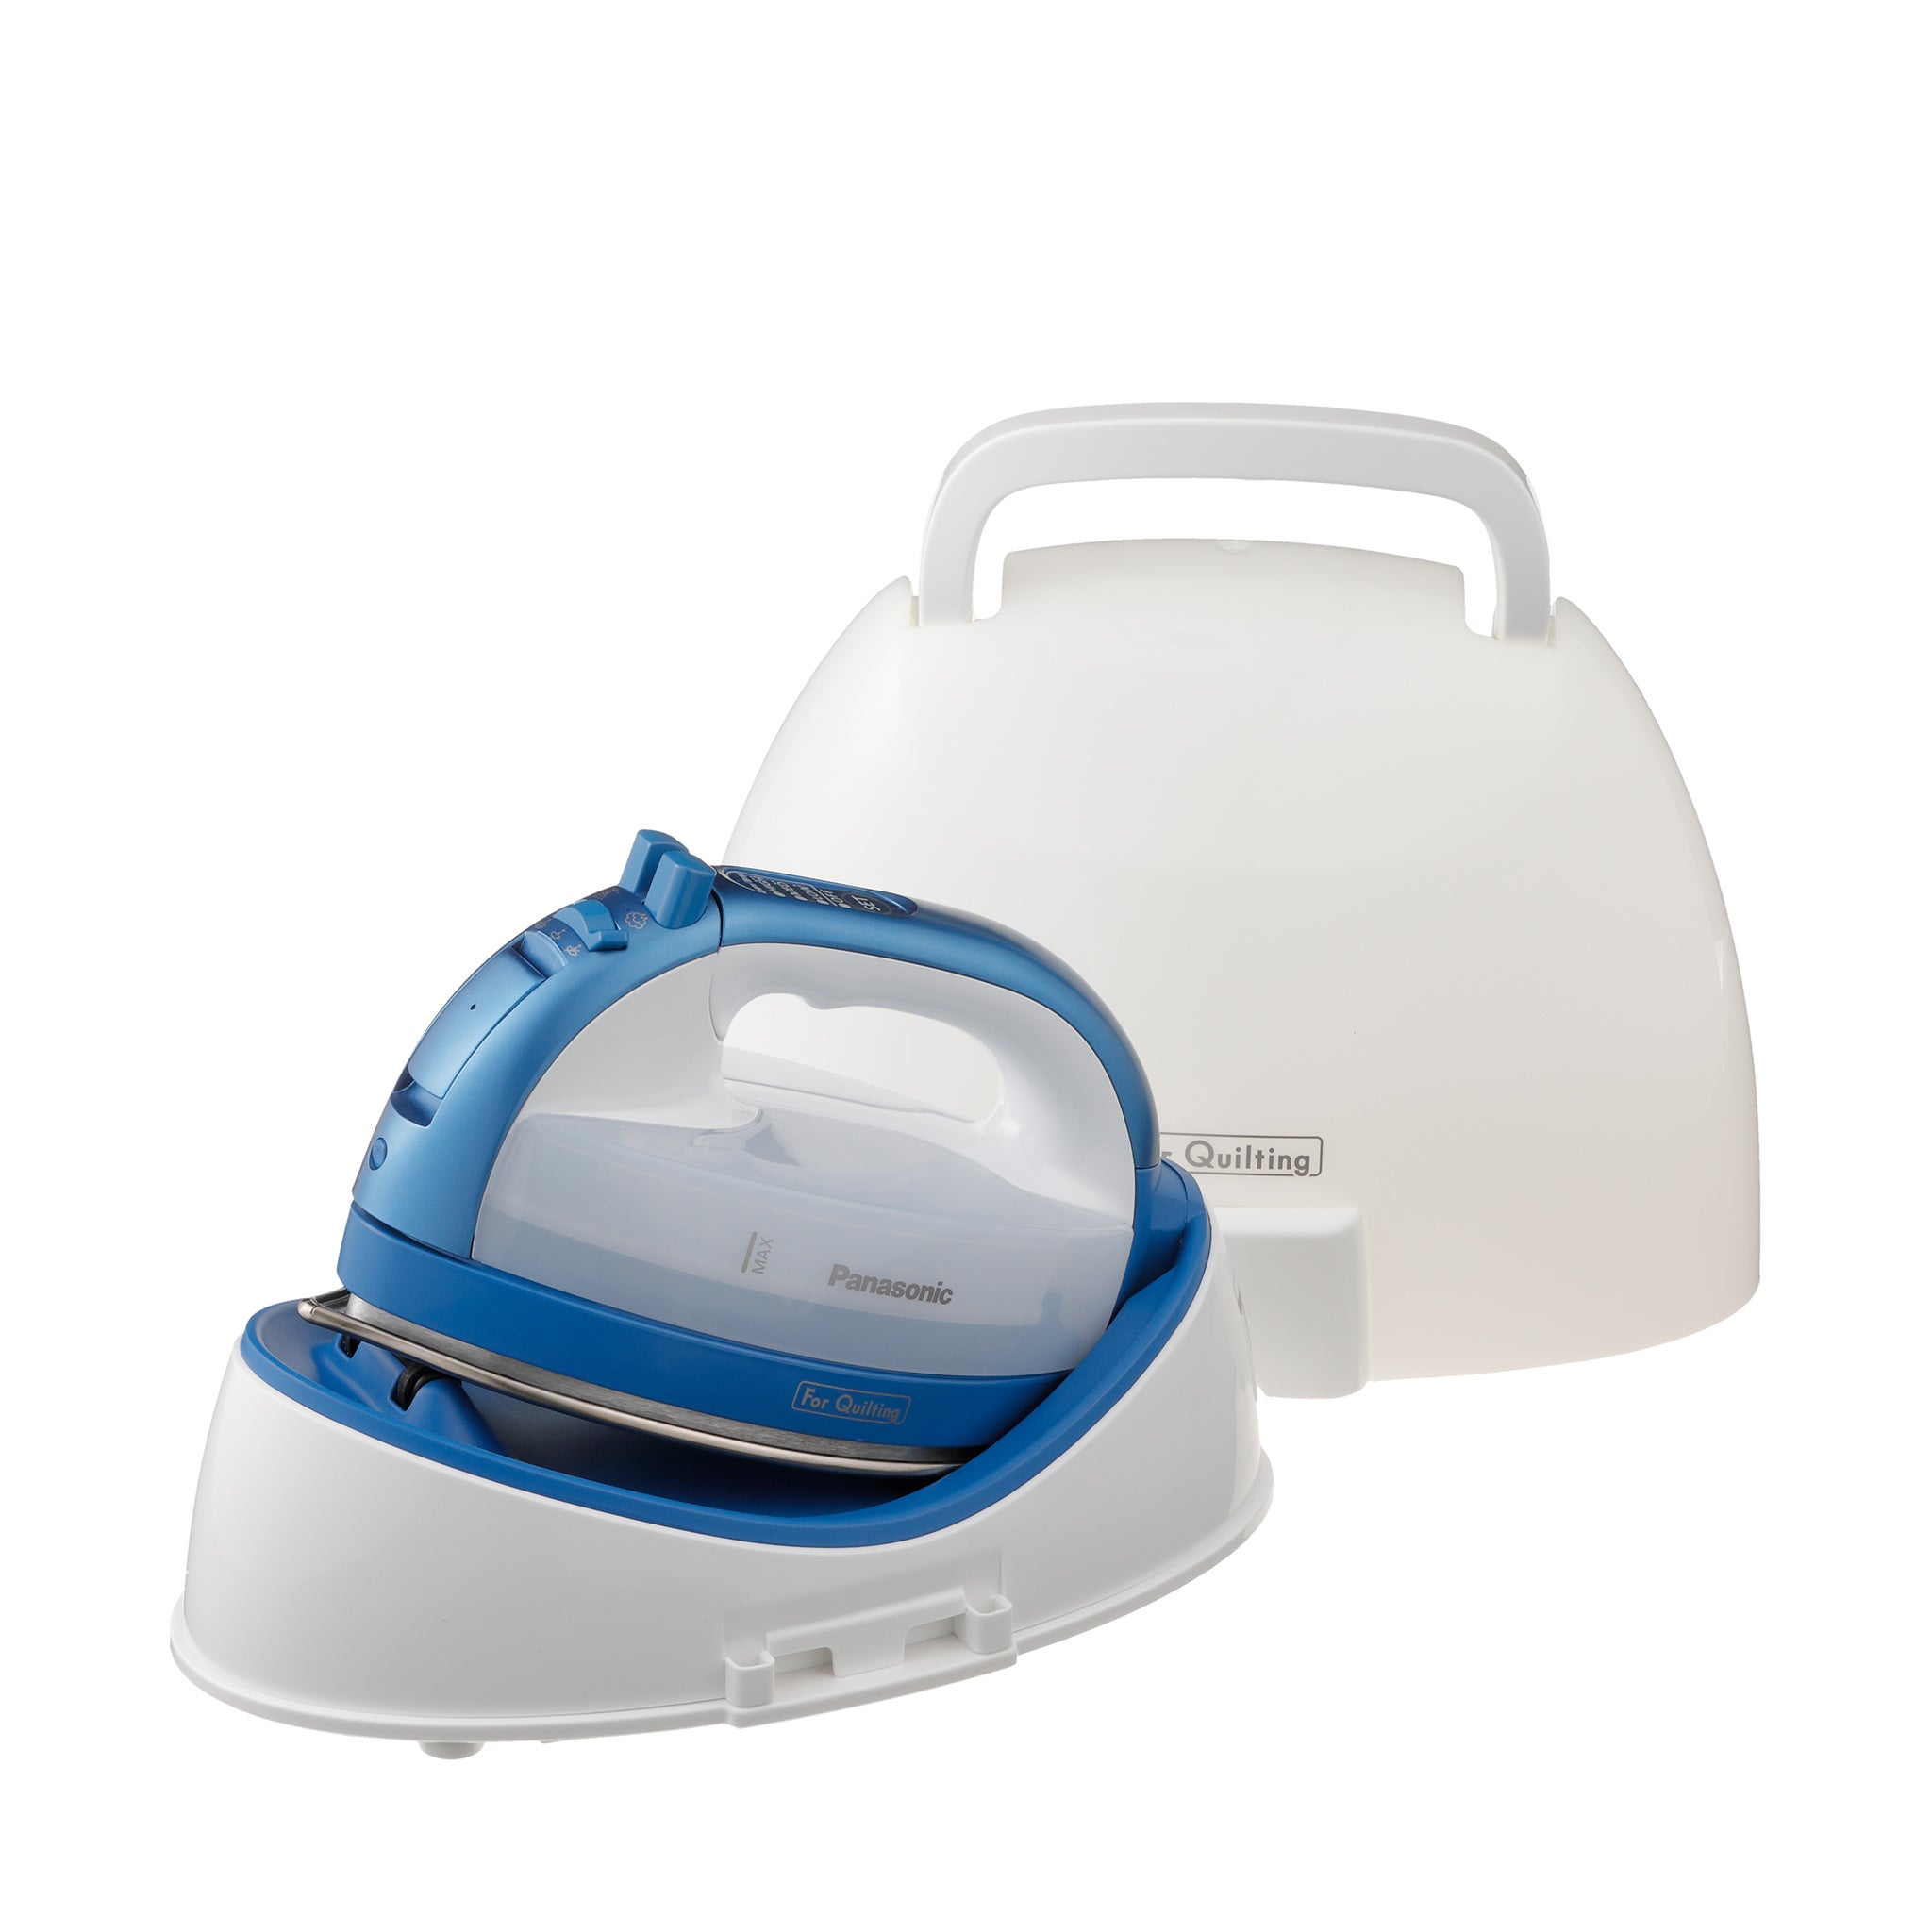 Steam generator irons review фото 2